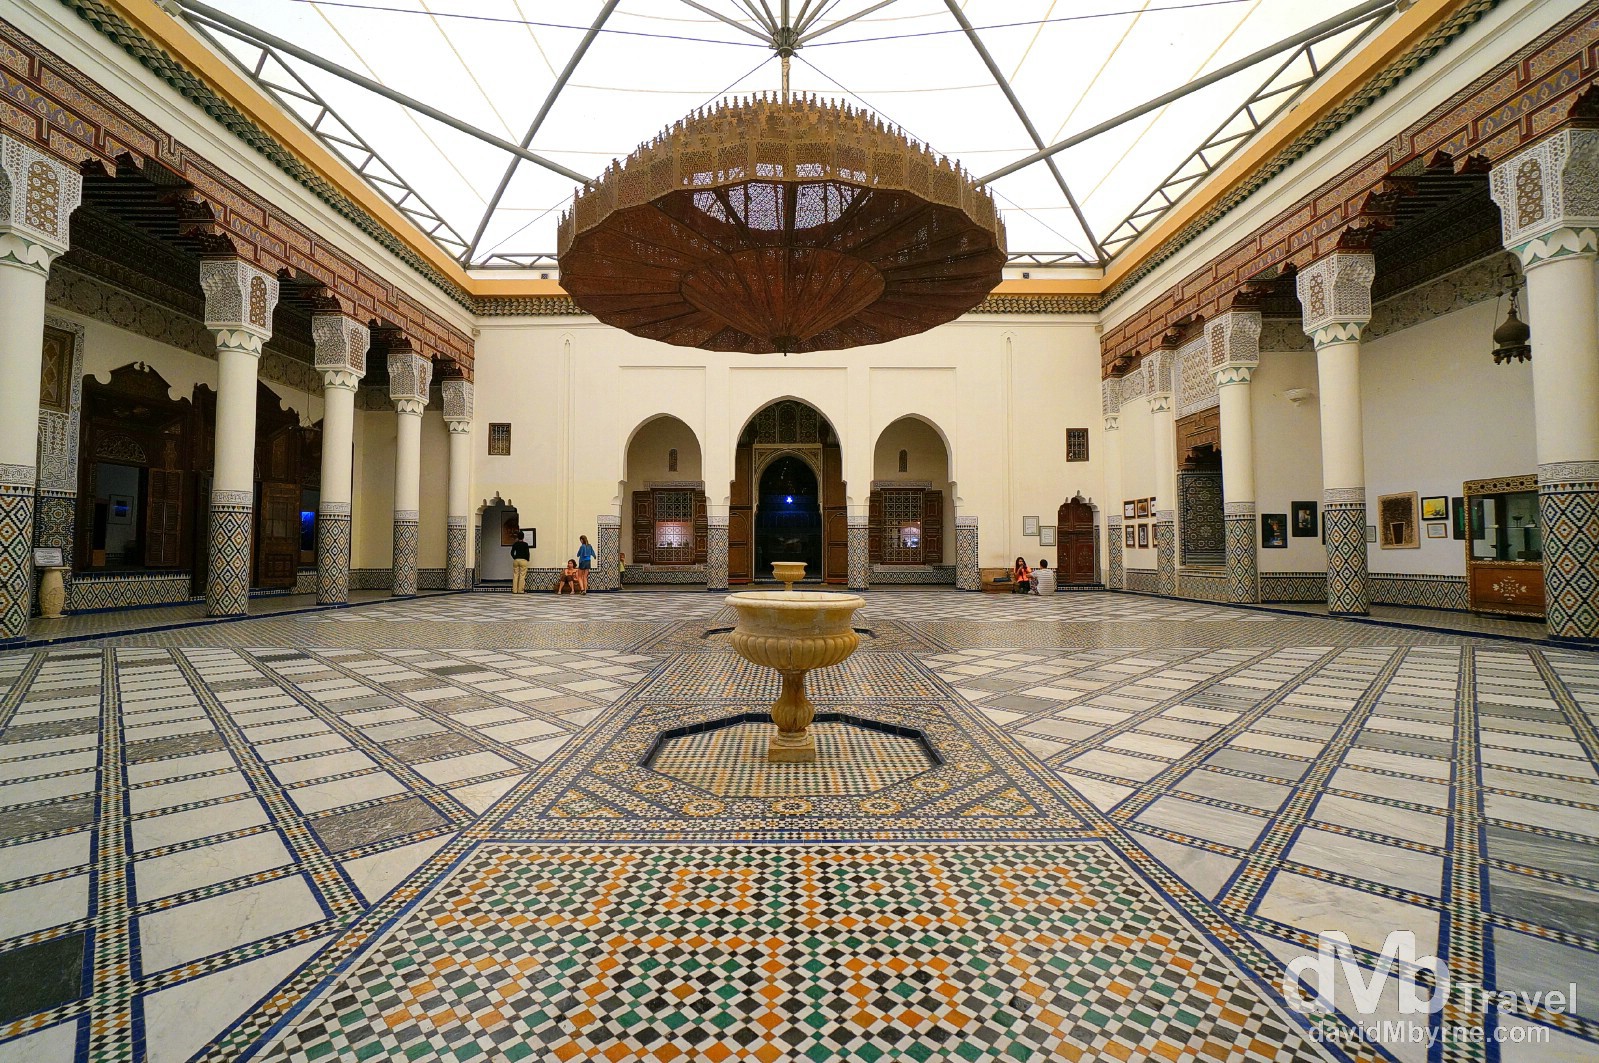 The arcaded inner courtyard of Mnebhi Palace, home to the Musee de Marrakech, Morocco. May 6th, 2014. 